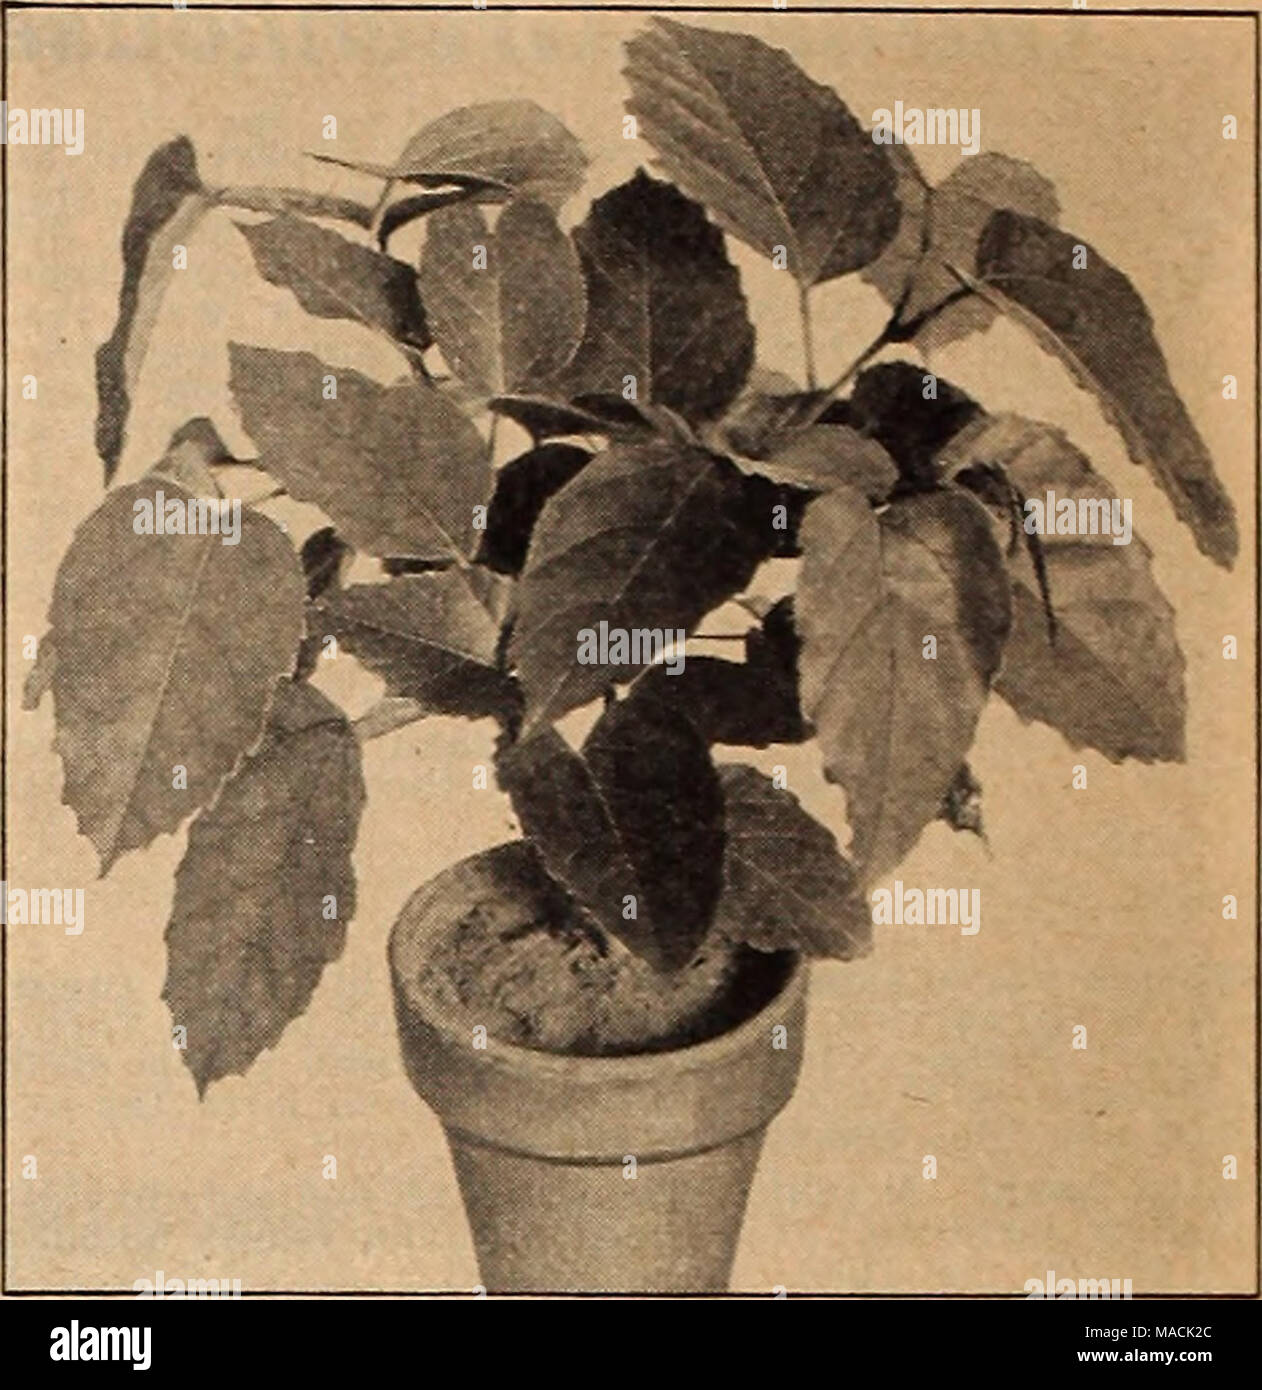 . Dreer's wholesale catalog for florists and market gardeners : 1942 winter spring summer . Cissus antarctica Cissus Antarctica—Kangaroo Vine A house plant resembling in habit the well-known and popular Grape Ivy, Vitis rhombifolia. The deeply toothed, rather thick, glossy dark green leaves about 4 inches long are ovate or oblong and sometimes heart- shaped. They resemble those of the Chestnut Tree. The plant branches freely forming a compact attractive bush. As it grows larger it vines much like the Grape Ivy, having tendrils for climbing. 2-inch pots, 9c each; $ 8.00 per 100: $75.00 per 1000 Stock Photo